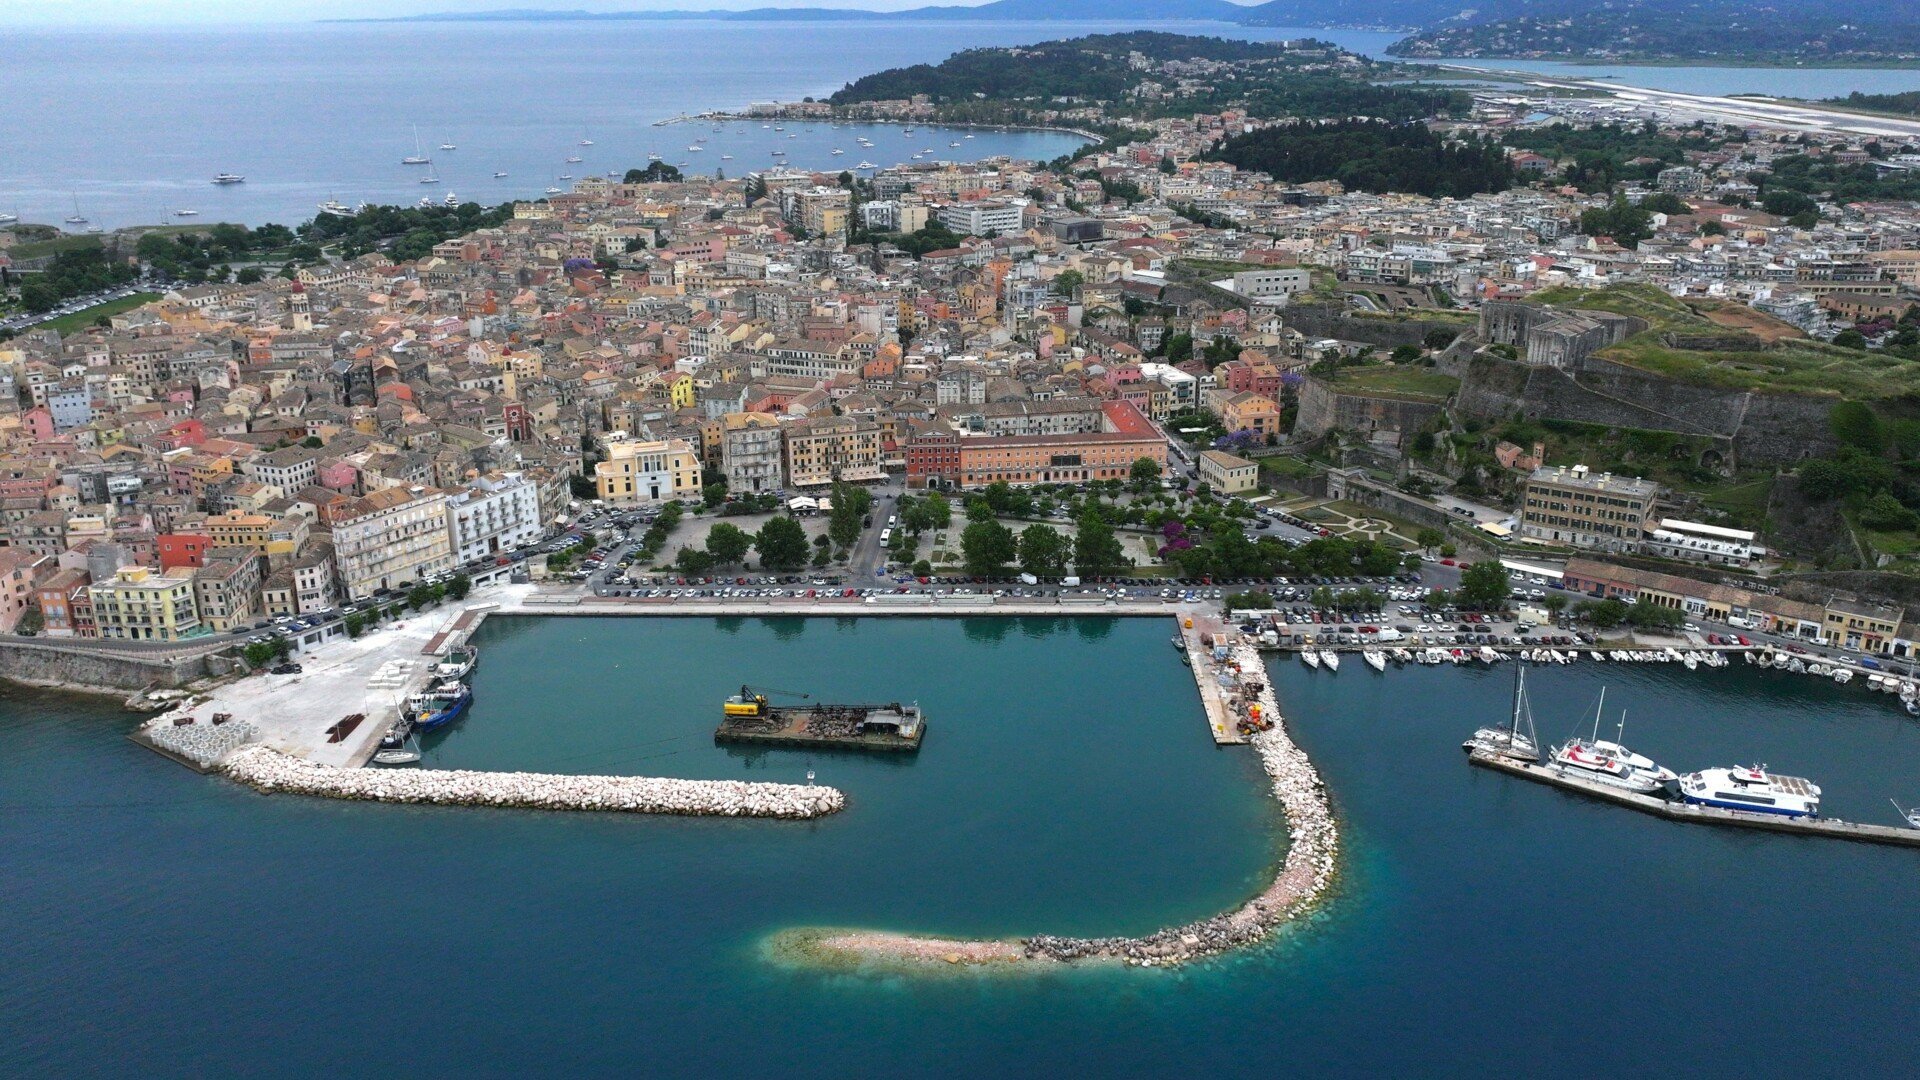 Corfu mega-yachts marina: The sub-concession contract for its construction to be signed